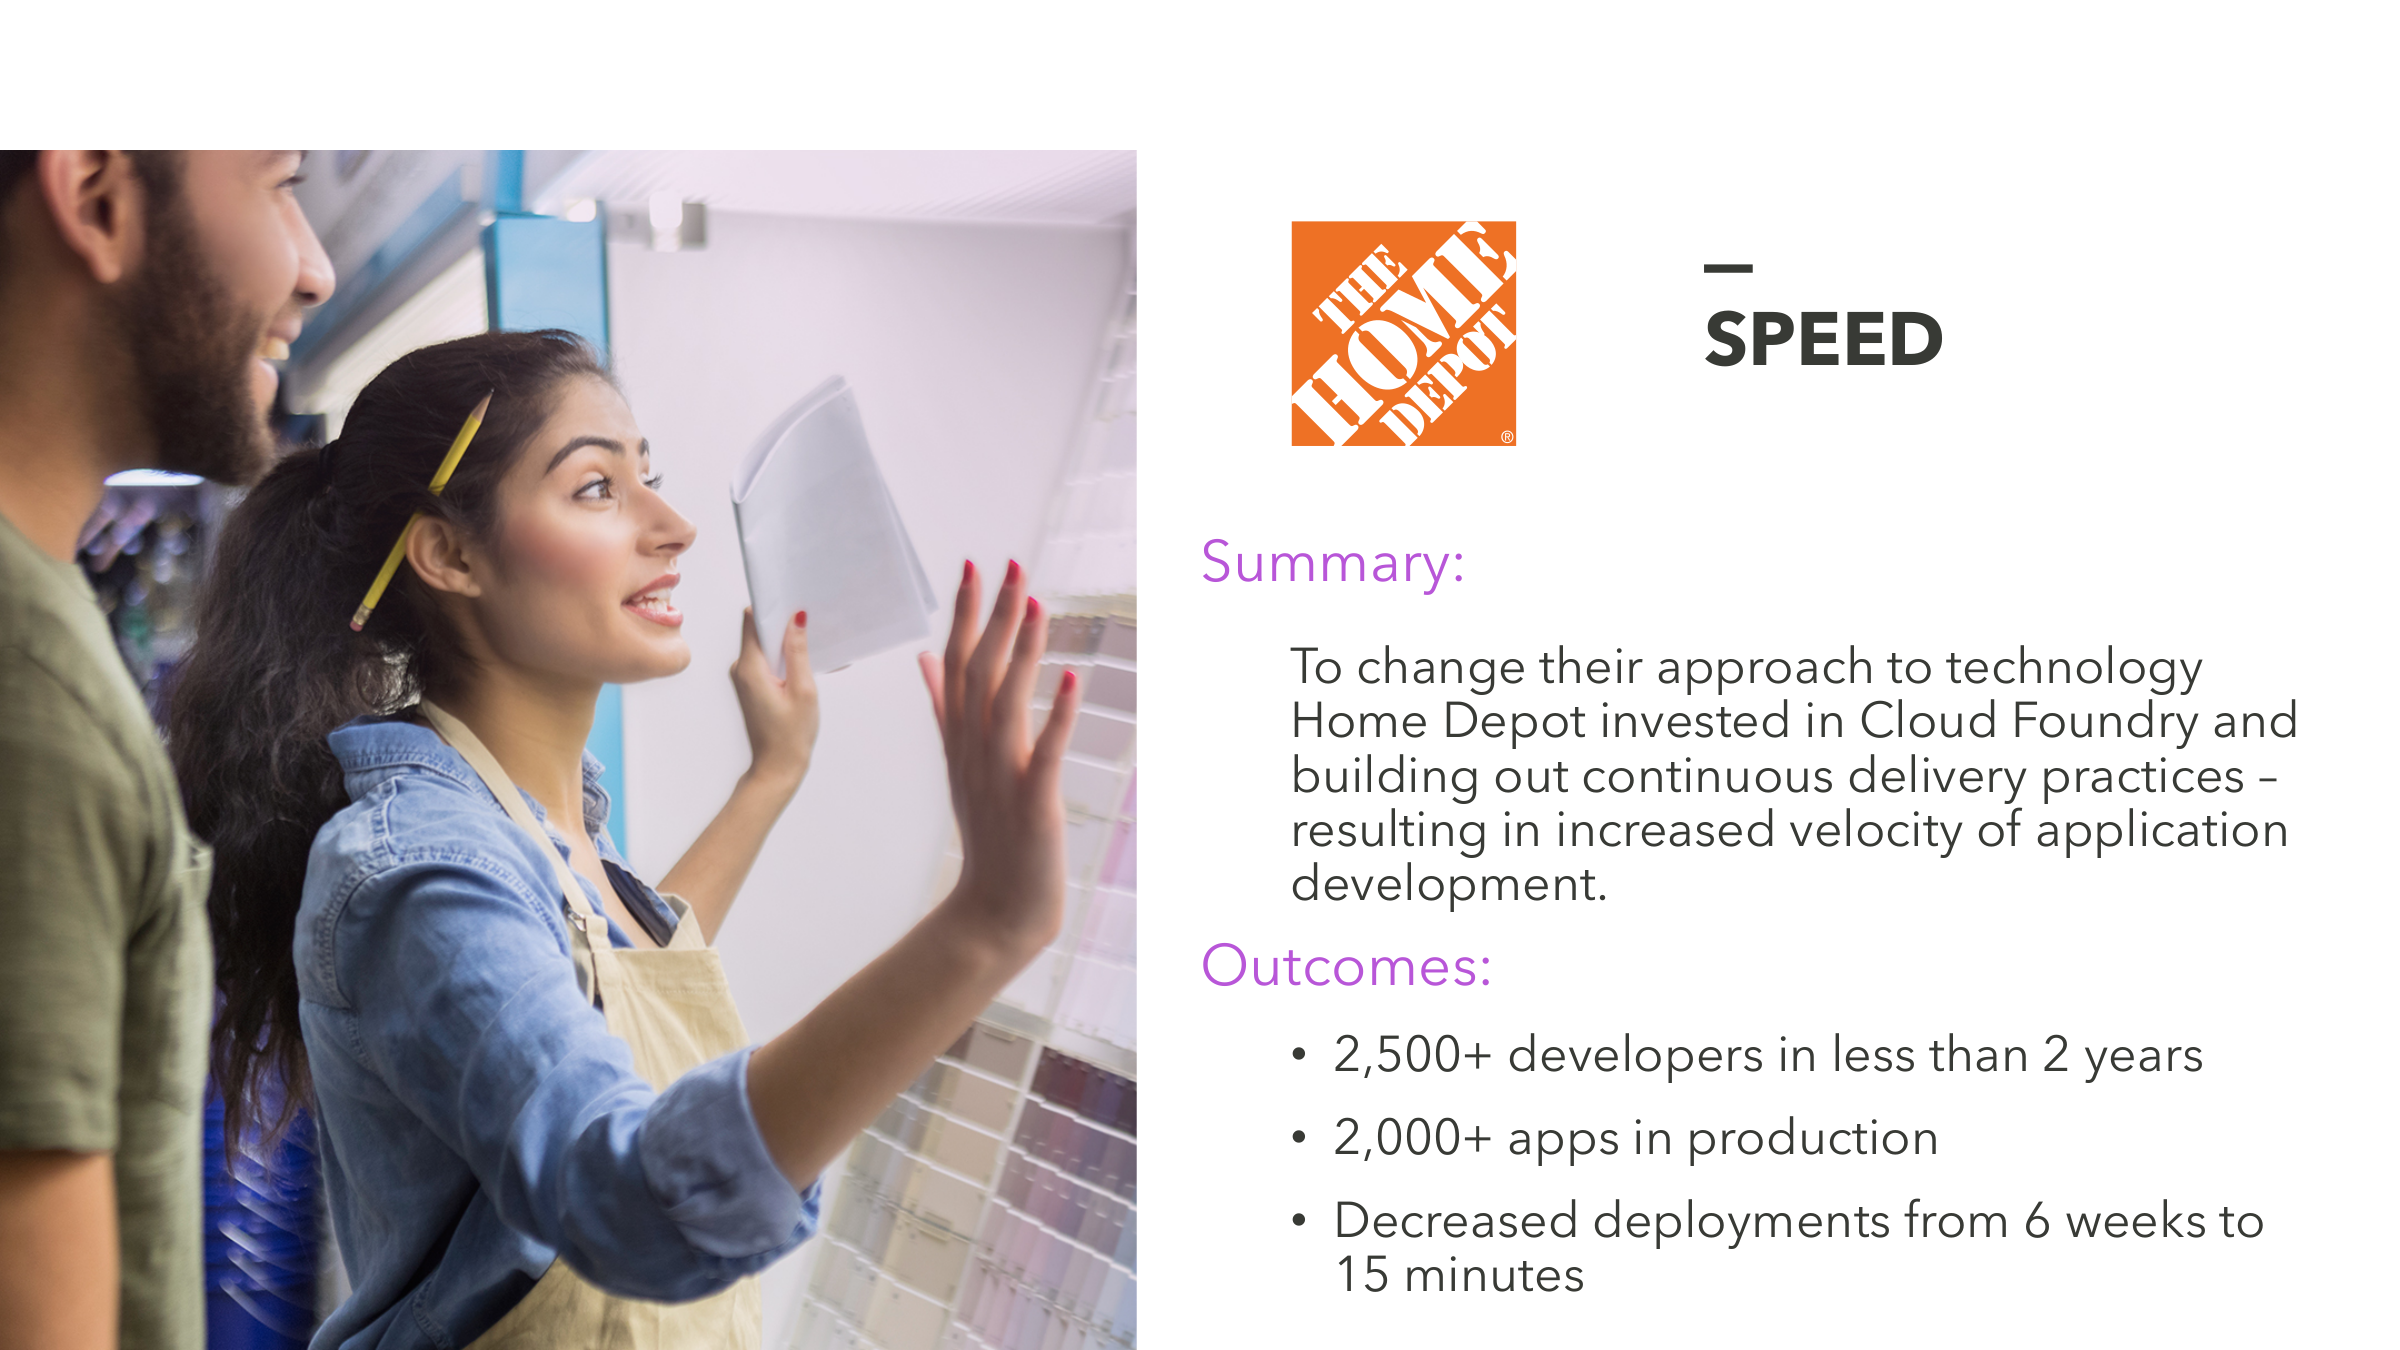 Slide from Kearn's keynote that shows a women with perfect nail polish considering a selection of paint colors with the Home Depot logo and stats about 'speed' in their deployment 